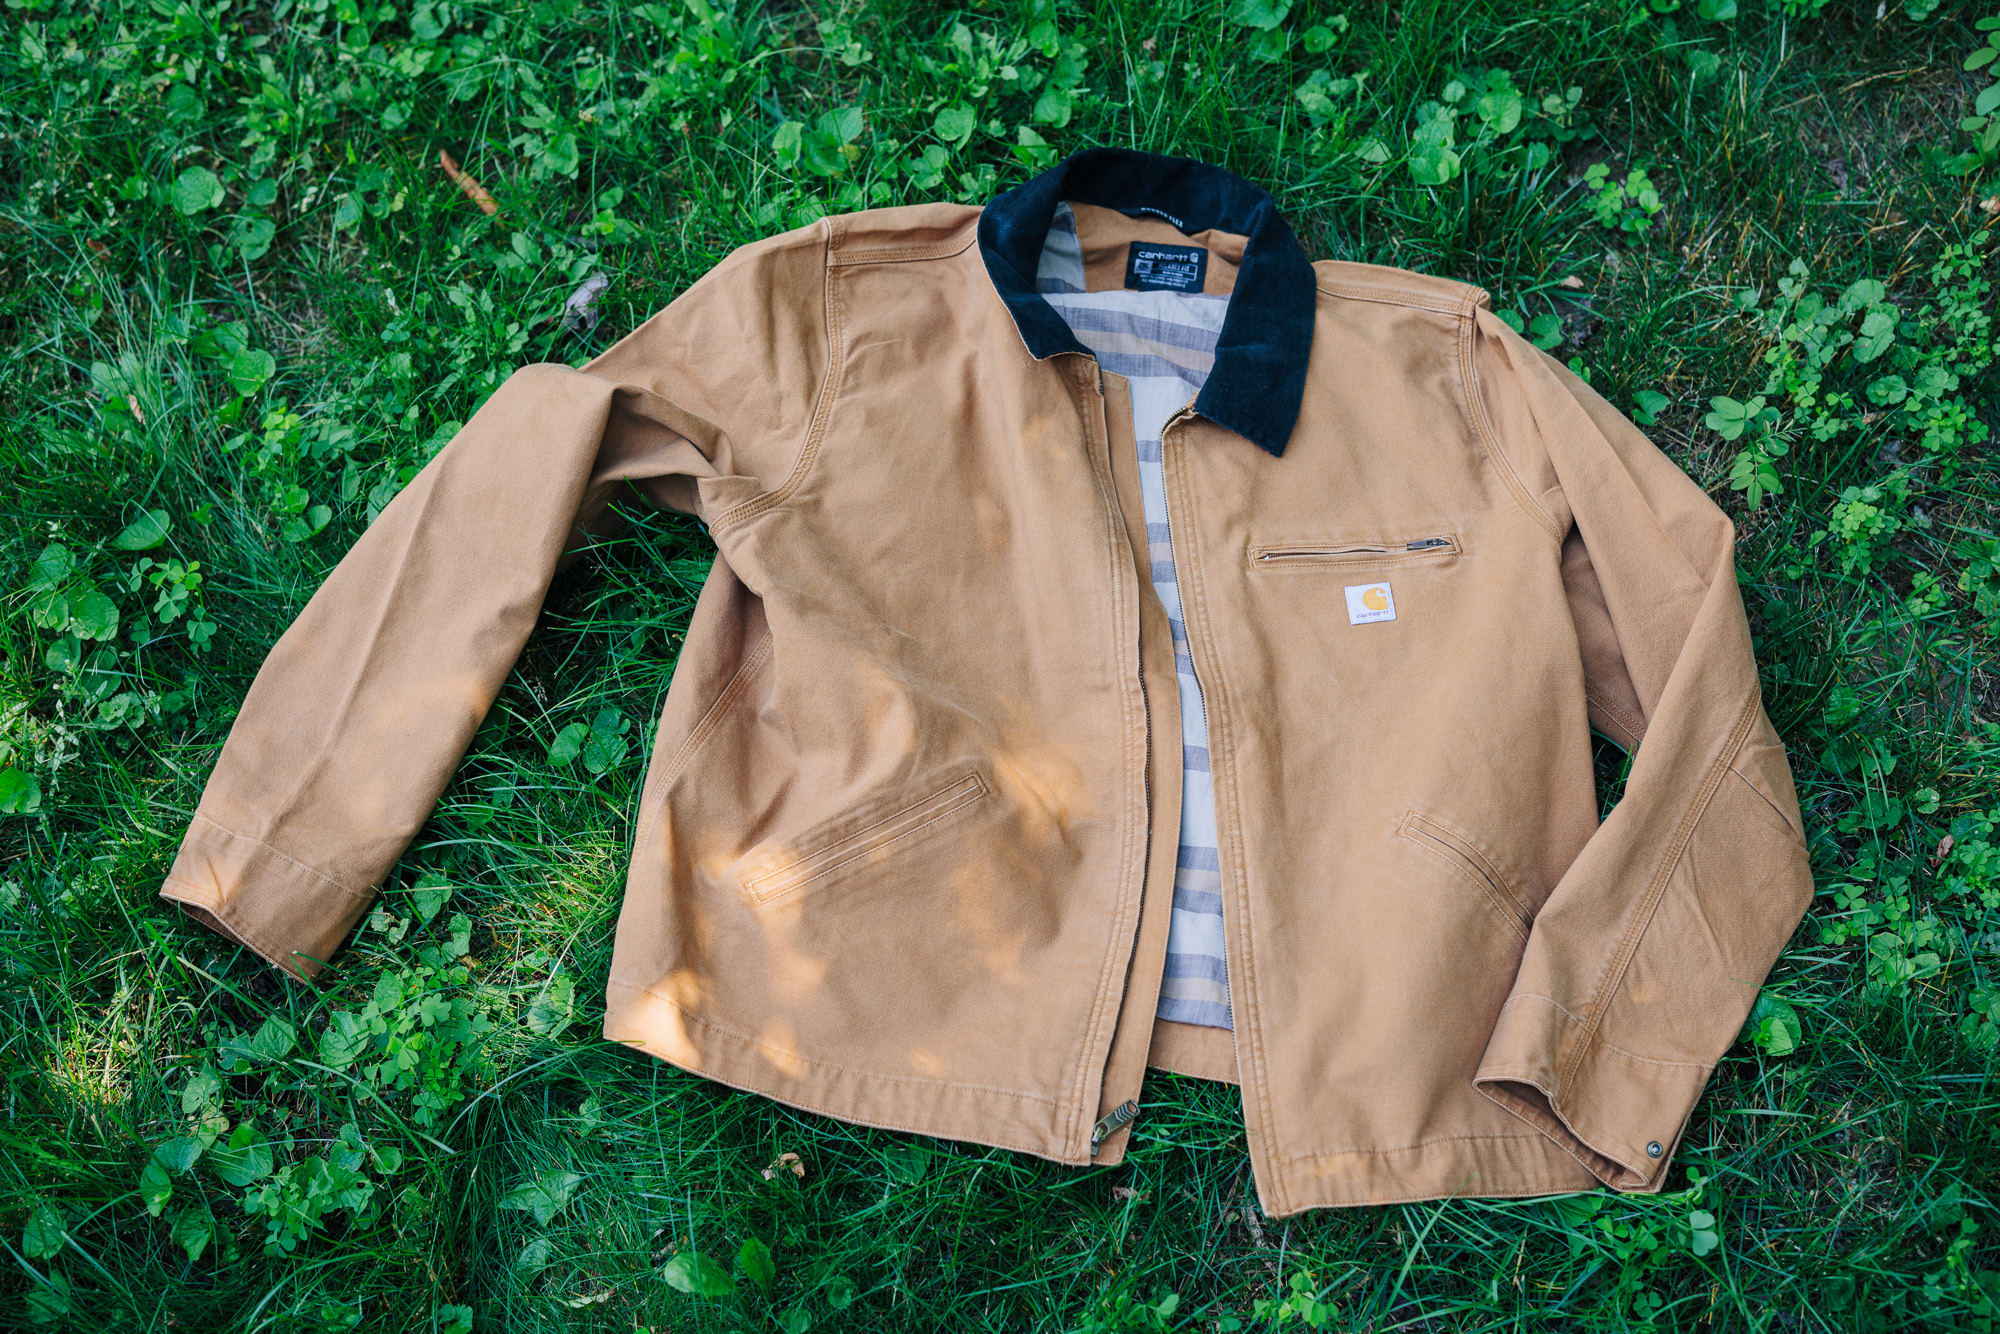 How Carhartt re-engineered an old work jacket that became an unlikely fashion icon